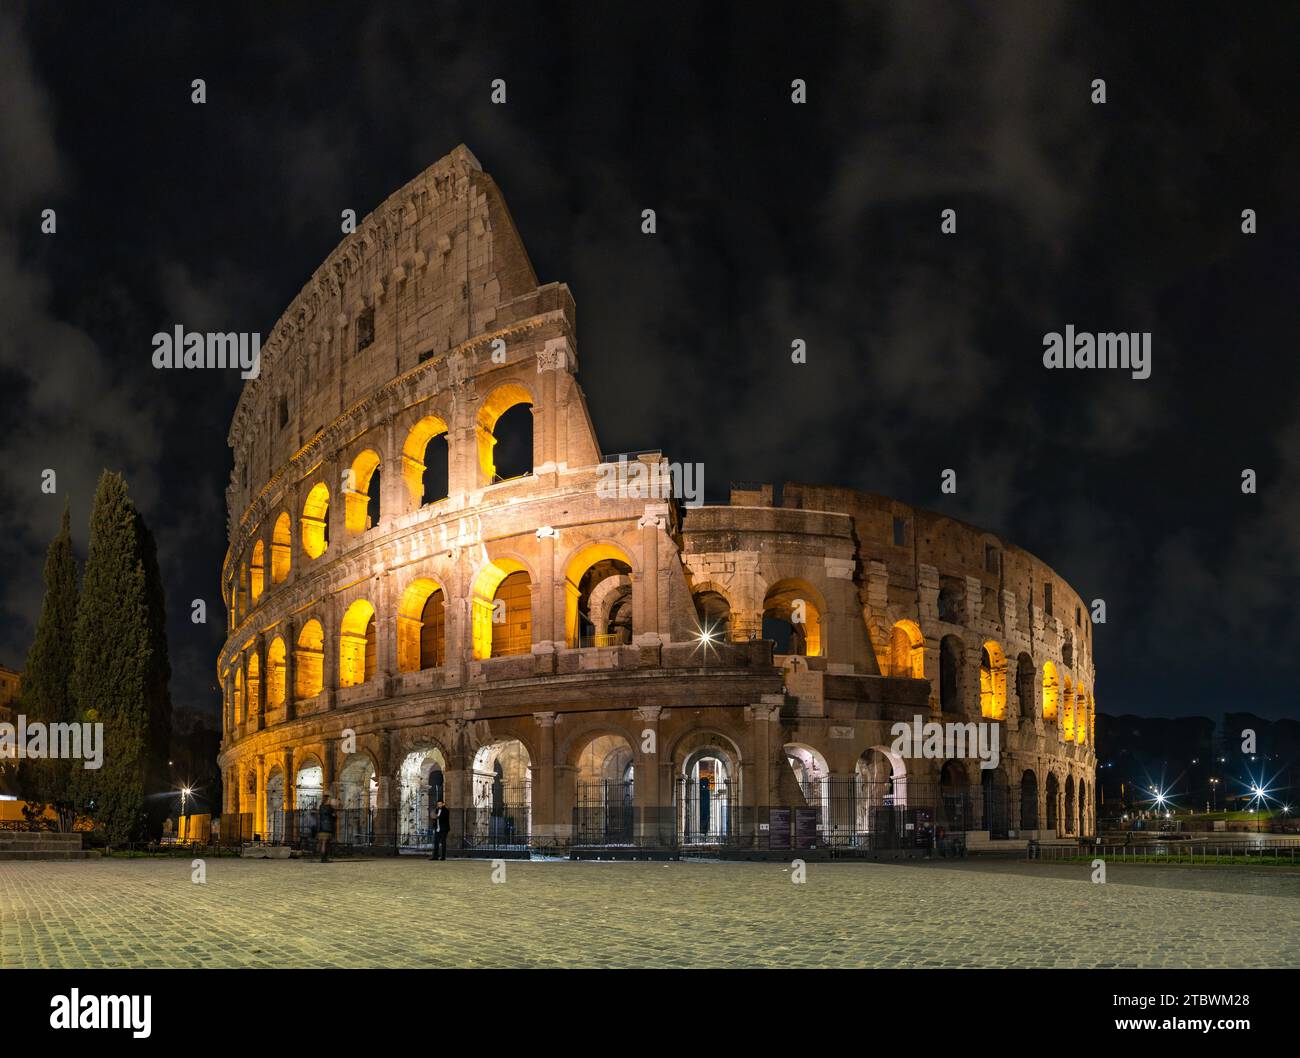 A picture of the Colosseum at night Stock Photo